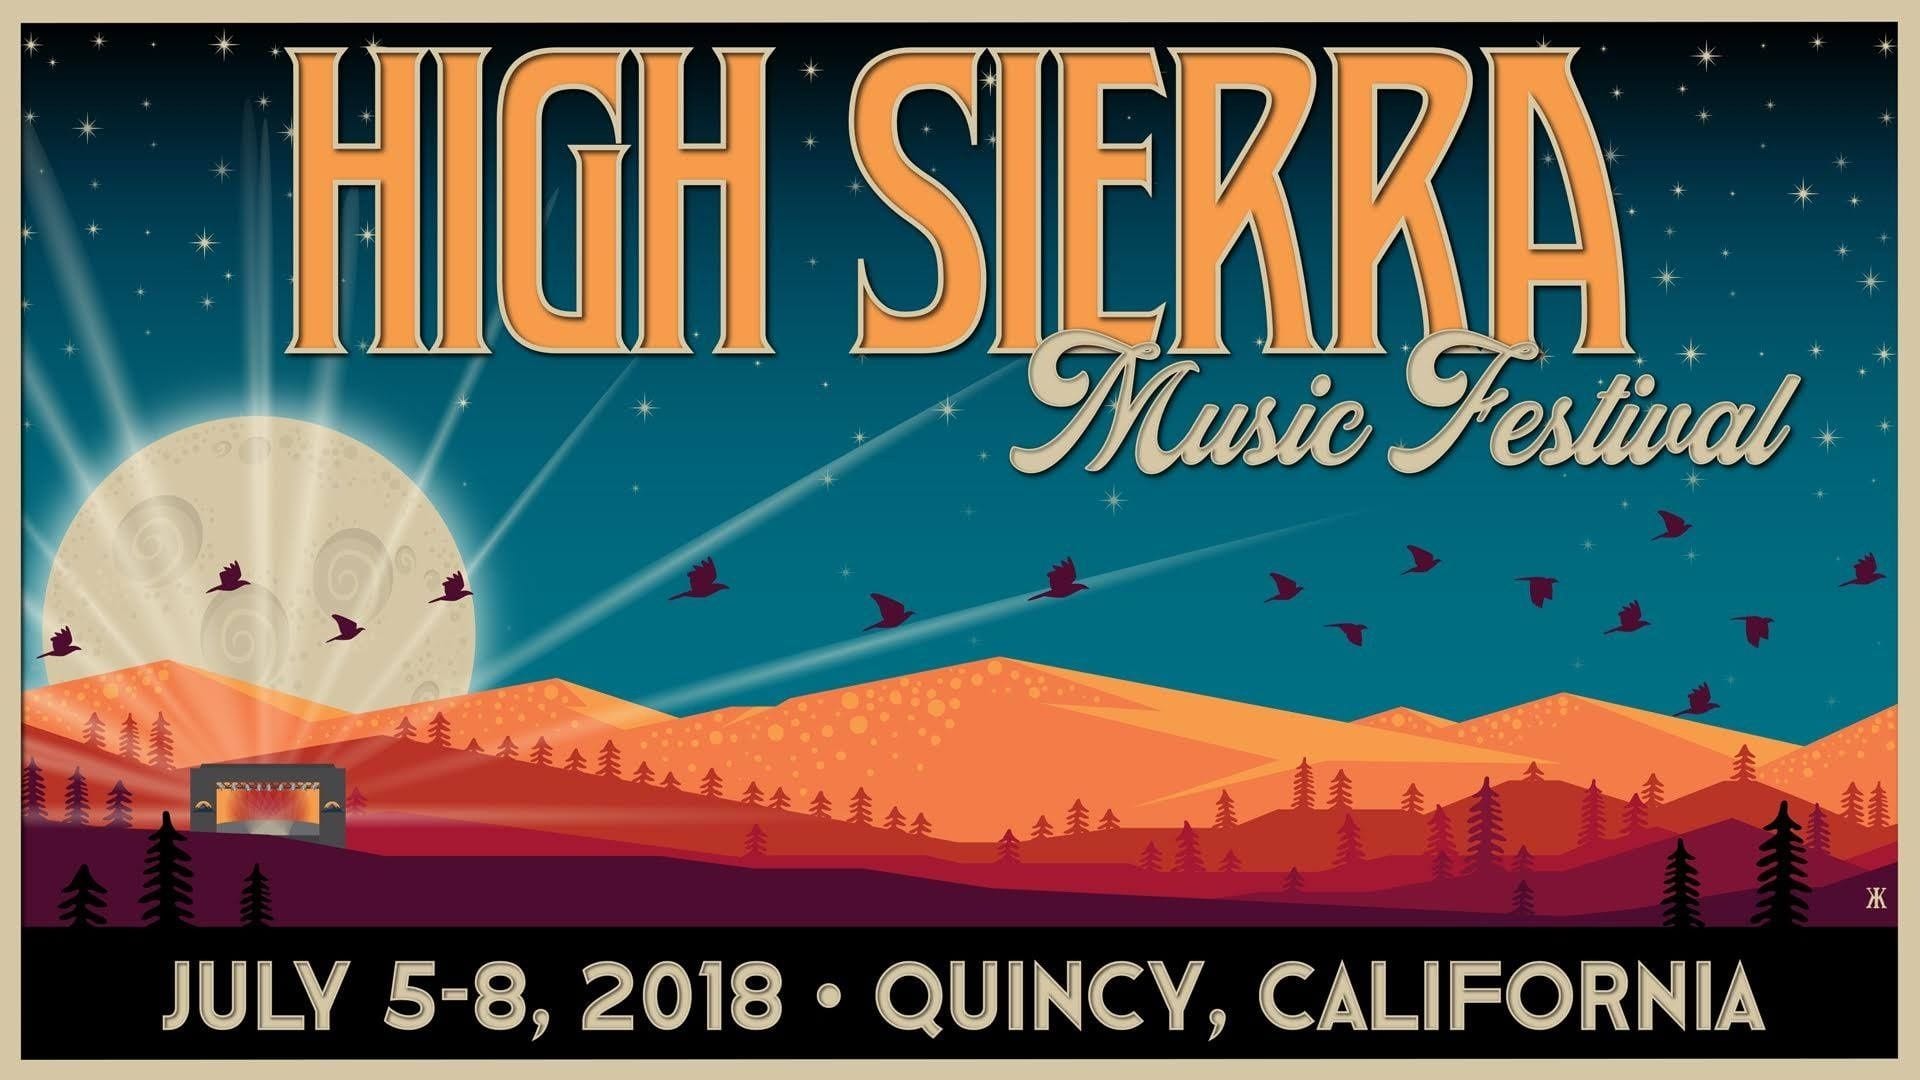 The Rock ‘N’ Roll Counterculture is Alive and Well at the High Sierra Music Festival